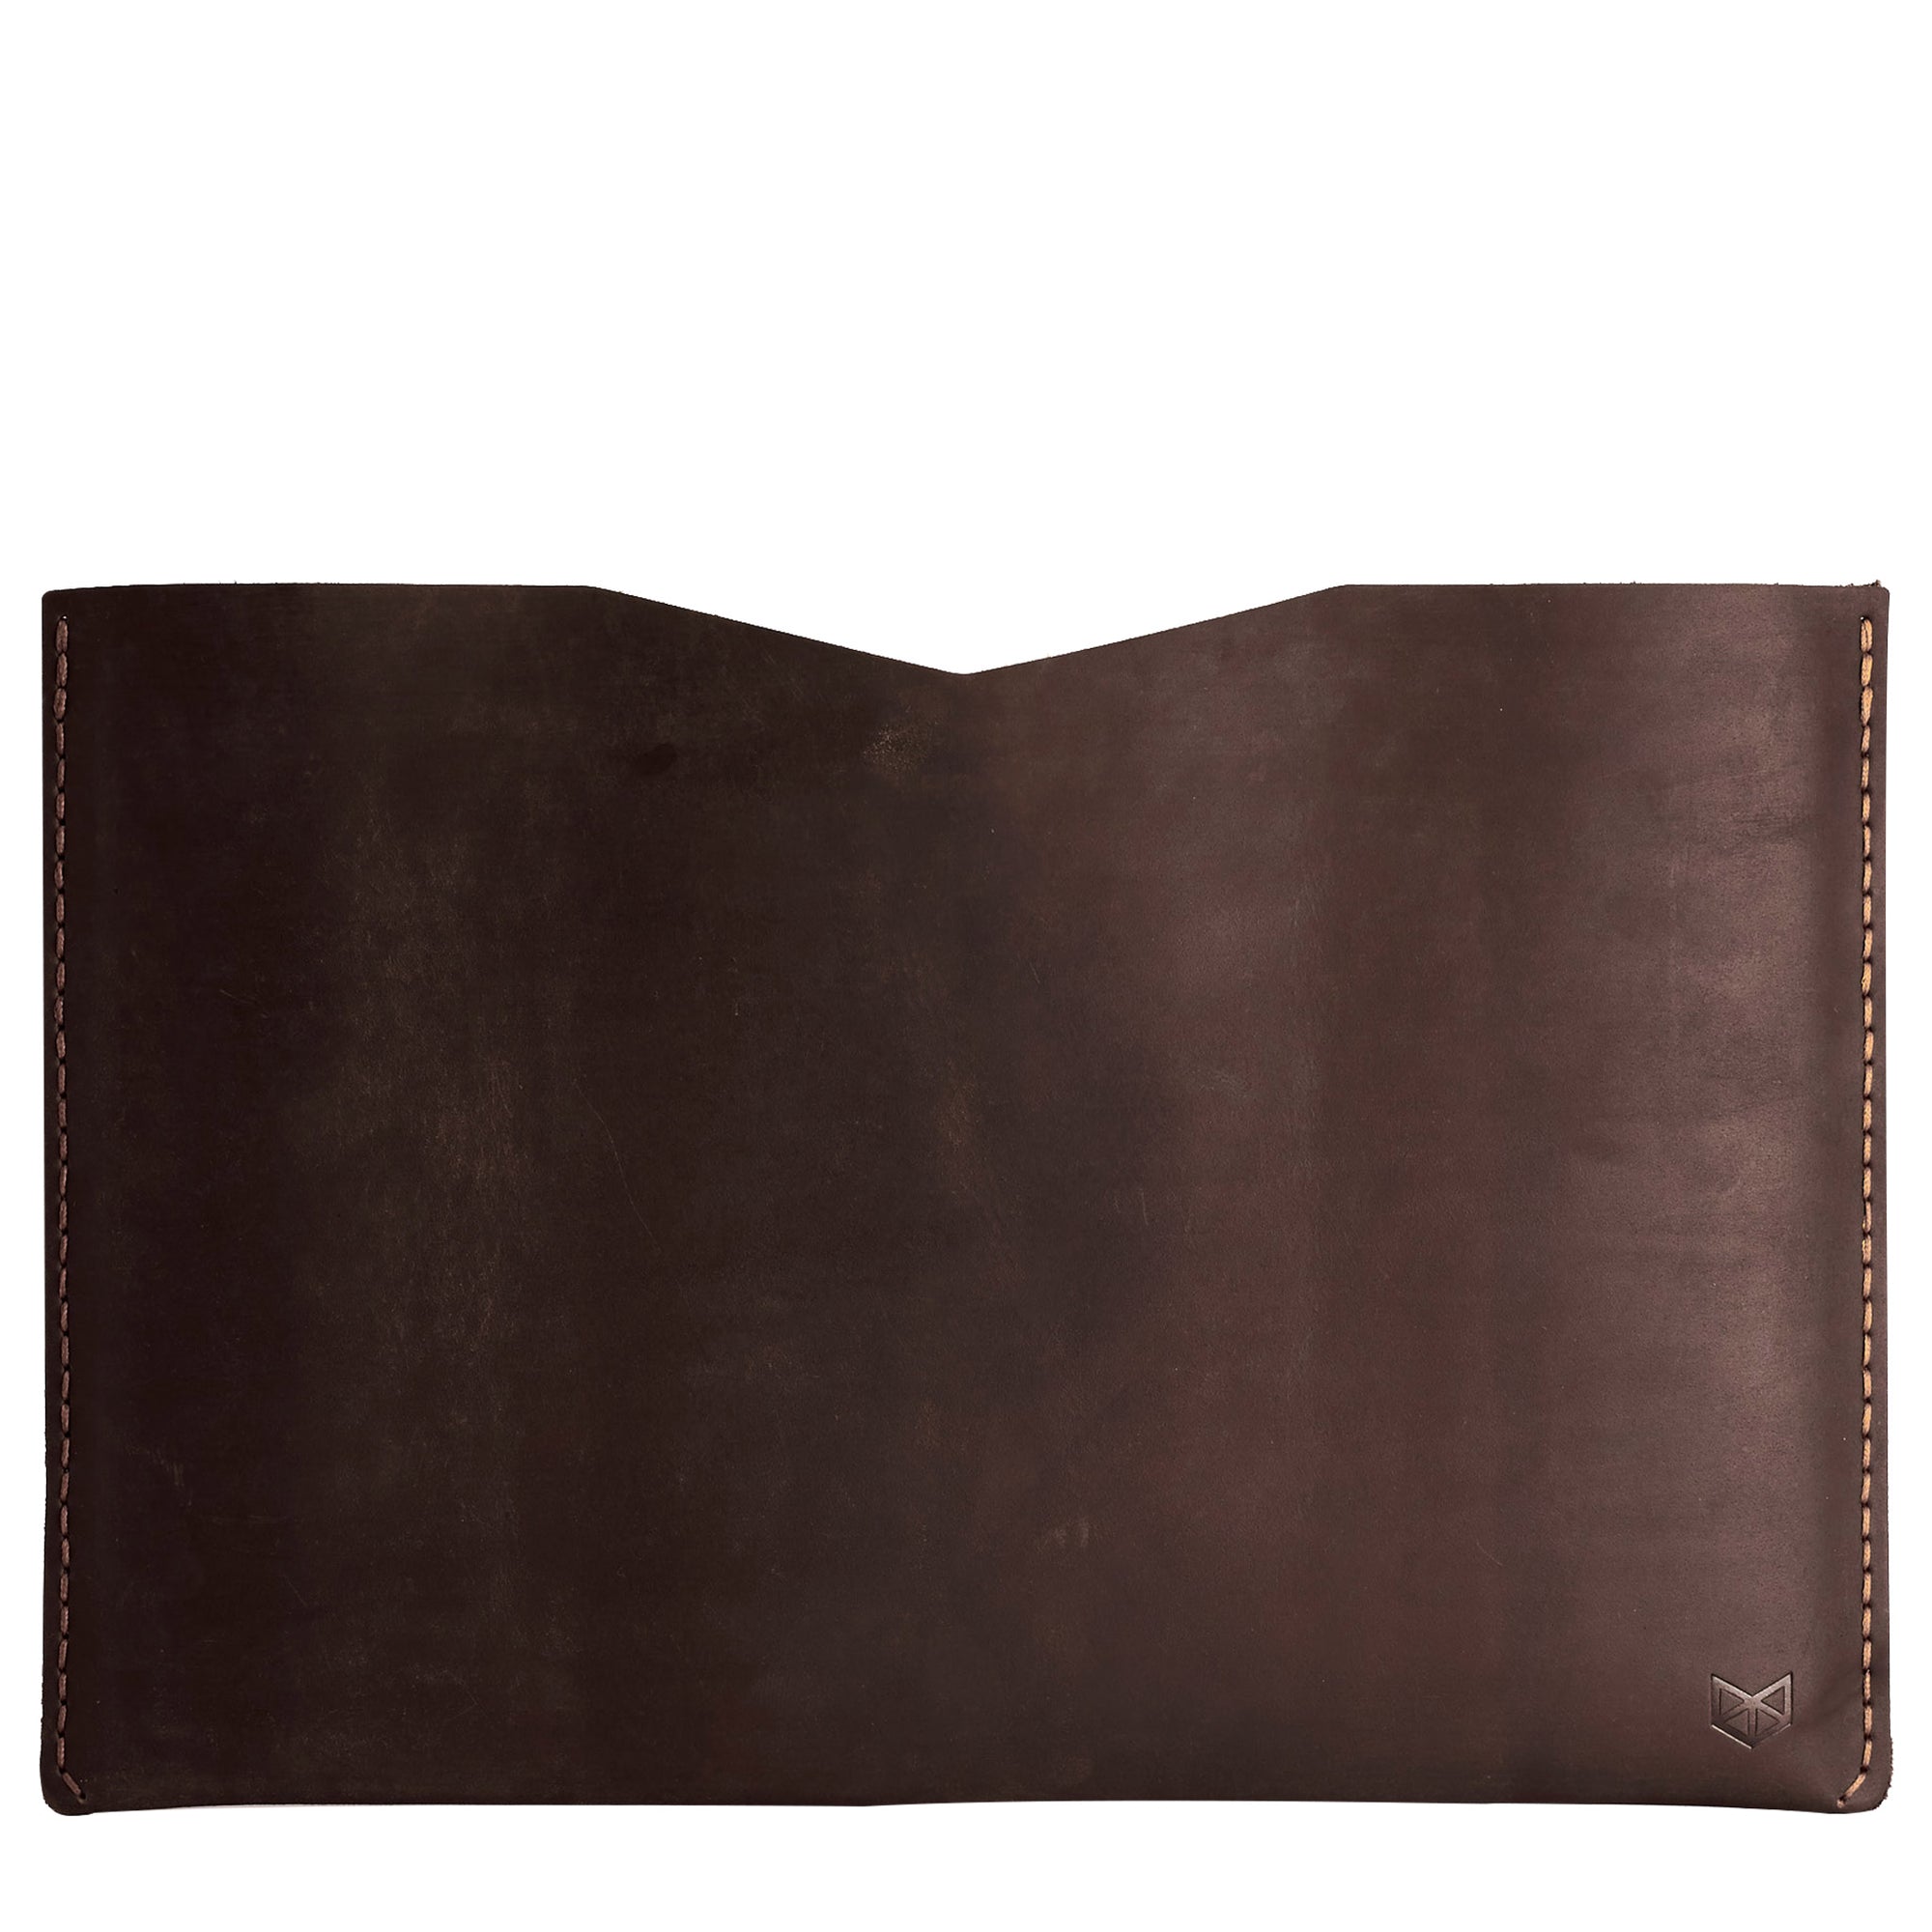 BASIC // MARRON: Leather Dell XPS laptop case by Capra Leather